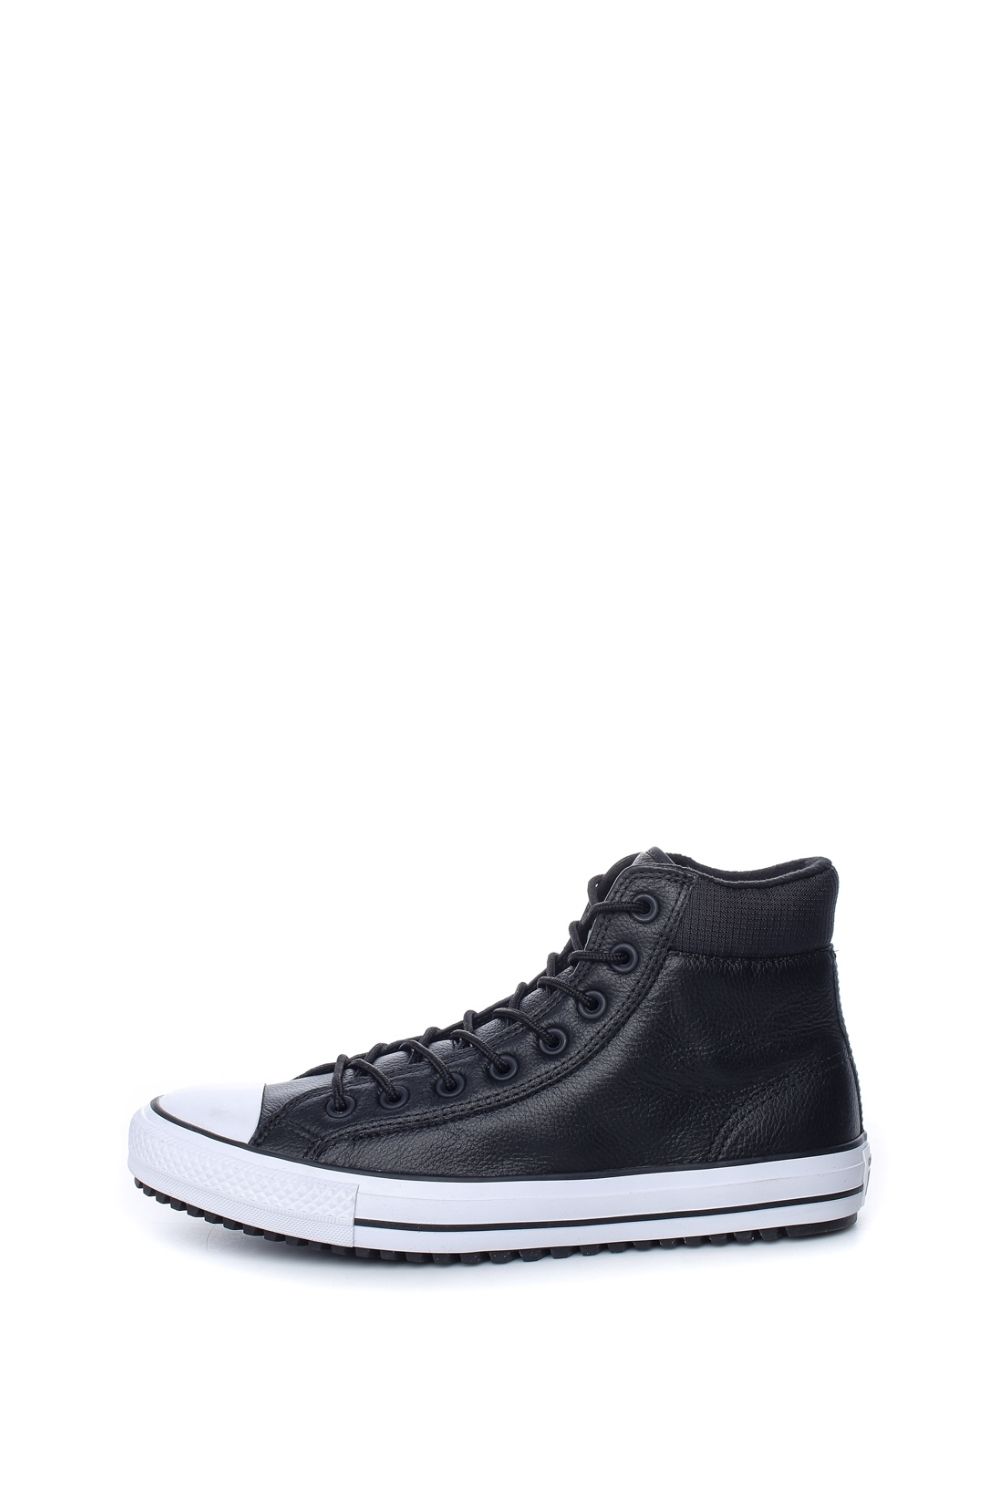 CONVERSE - Unisex ψηλά sneakers CONVERSE CHUCK TAYLOR ALL STAR PC μαύρα Ανδρικά/Παπούτσια/Sneakers